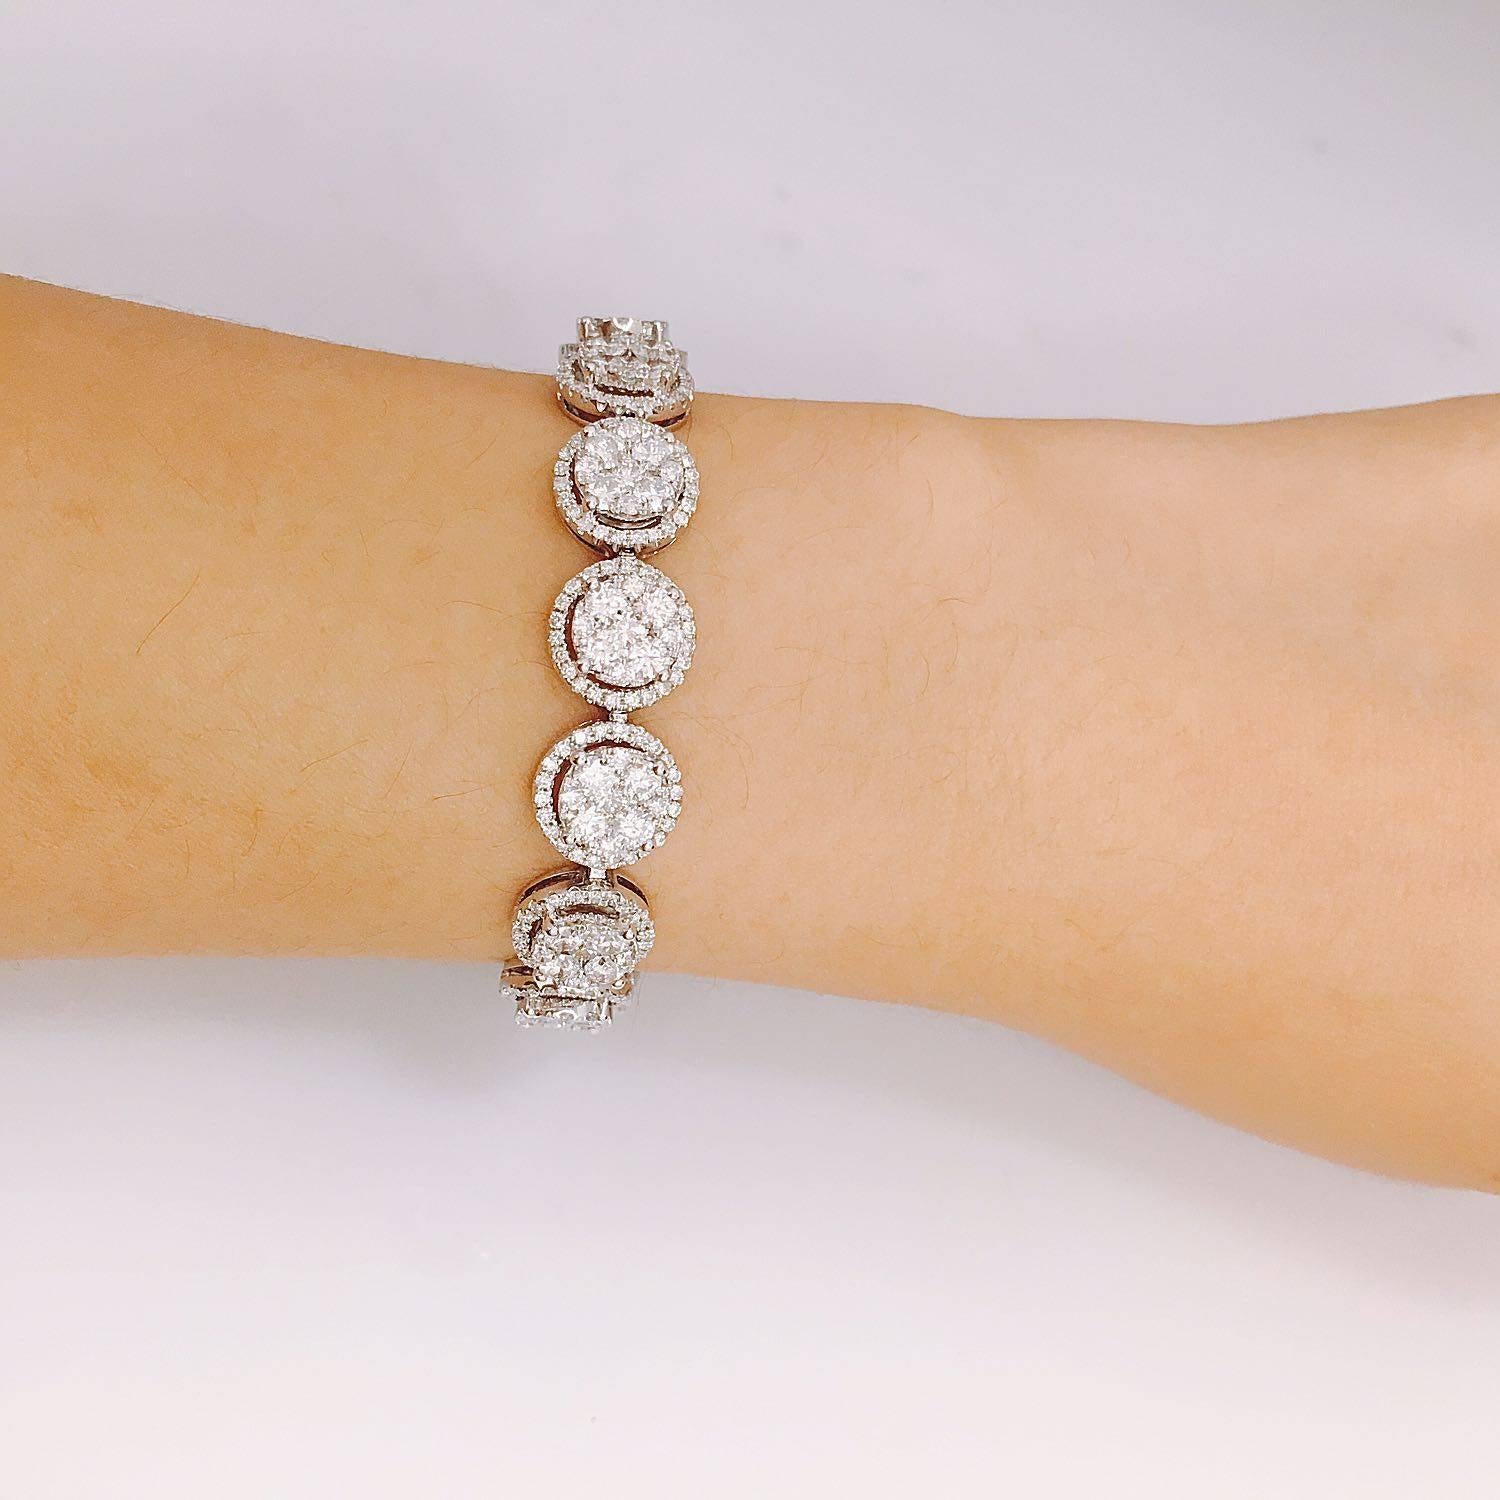 If you are looking for a bracelet which gives the illusion of a bracelet which would cost 8 times as much, Our unique trade mark illusion is perfect for you! 
Available in all wrist lengths, 10.85ct 
7"
F Color 
Vs1 Clarity
Excellent sparkle